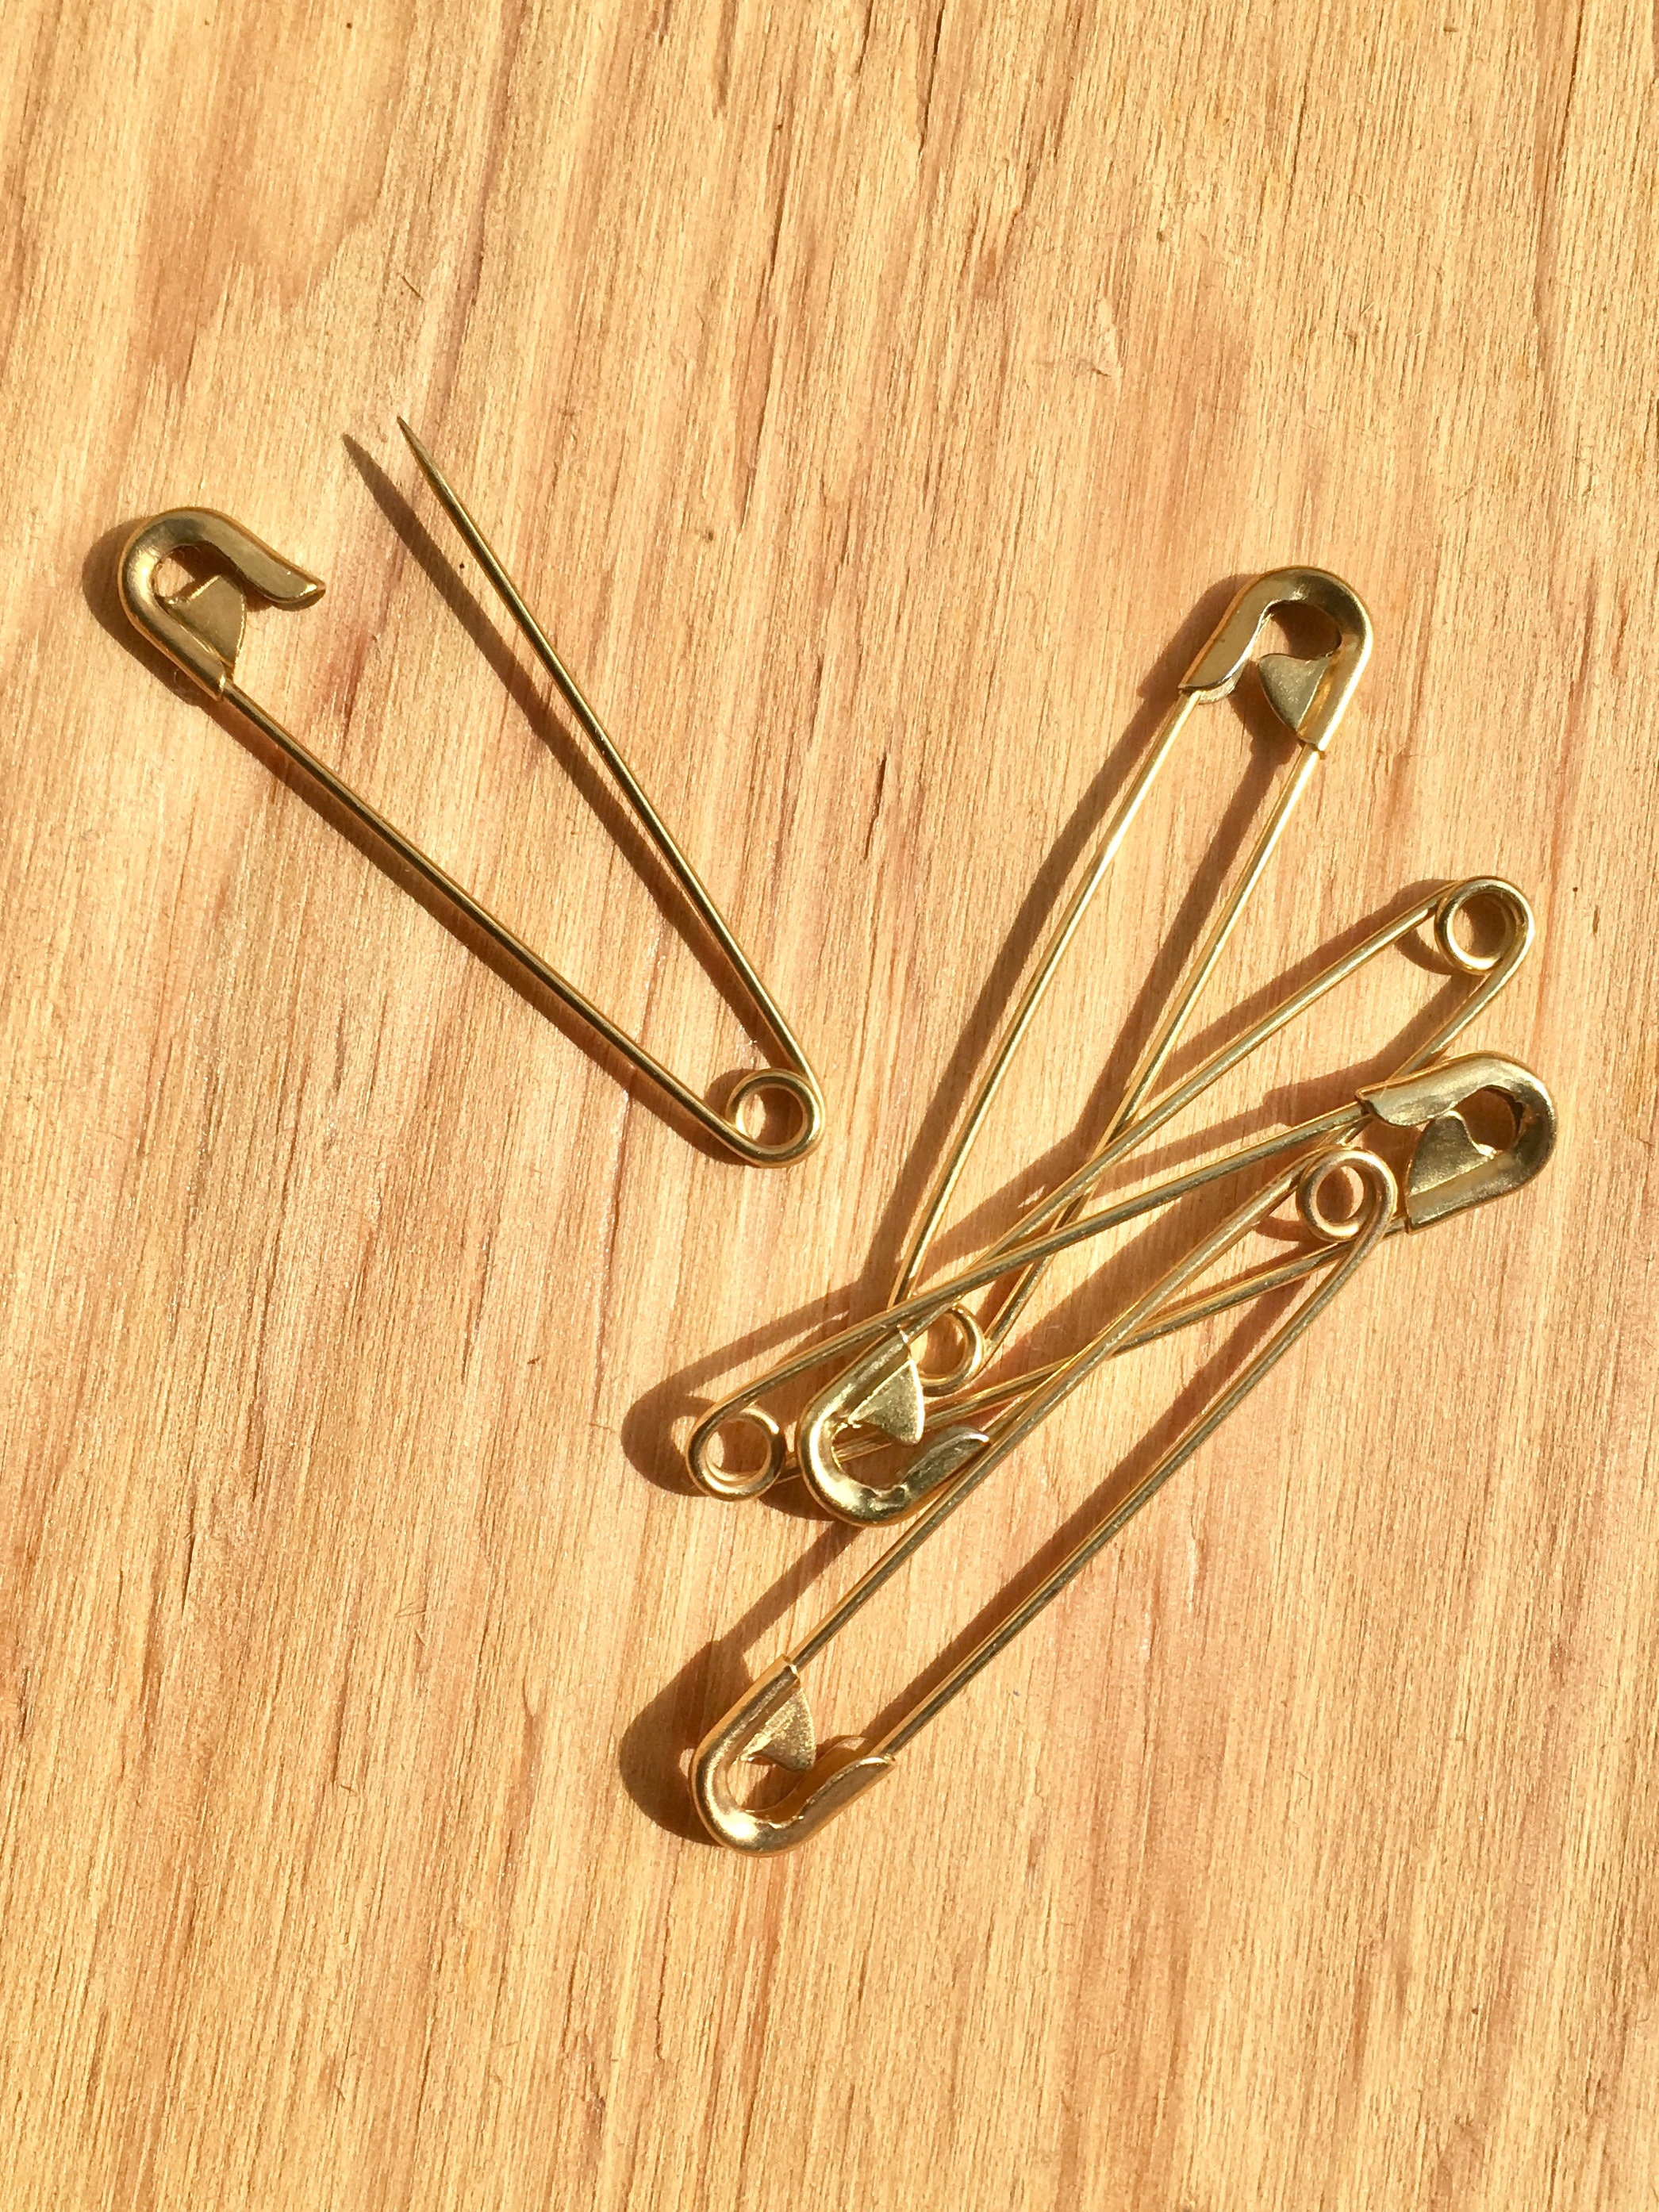 Traditional Steel Safety Pins - Wholesale Prices on Safety Pins by